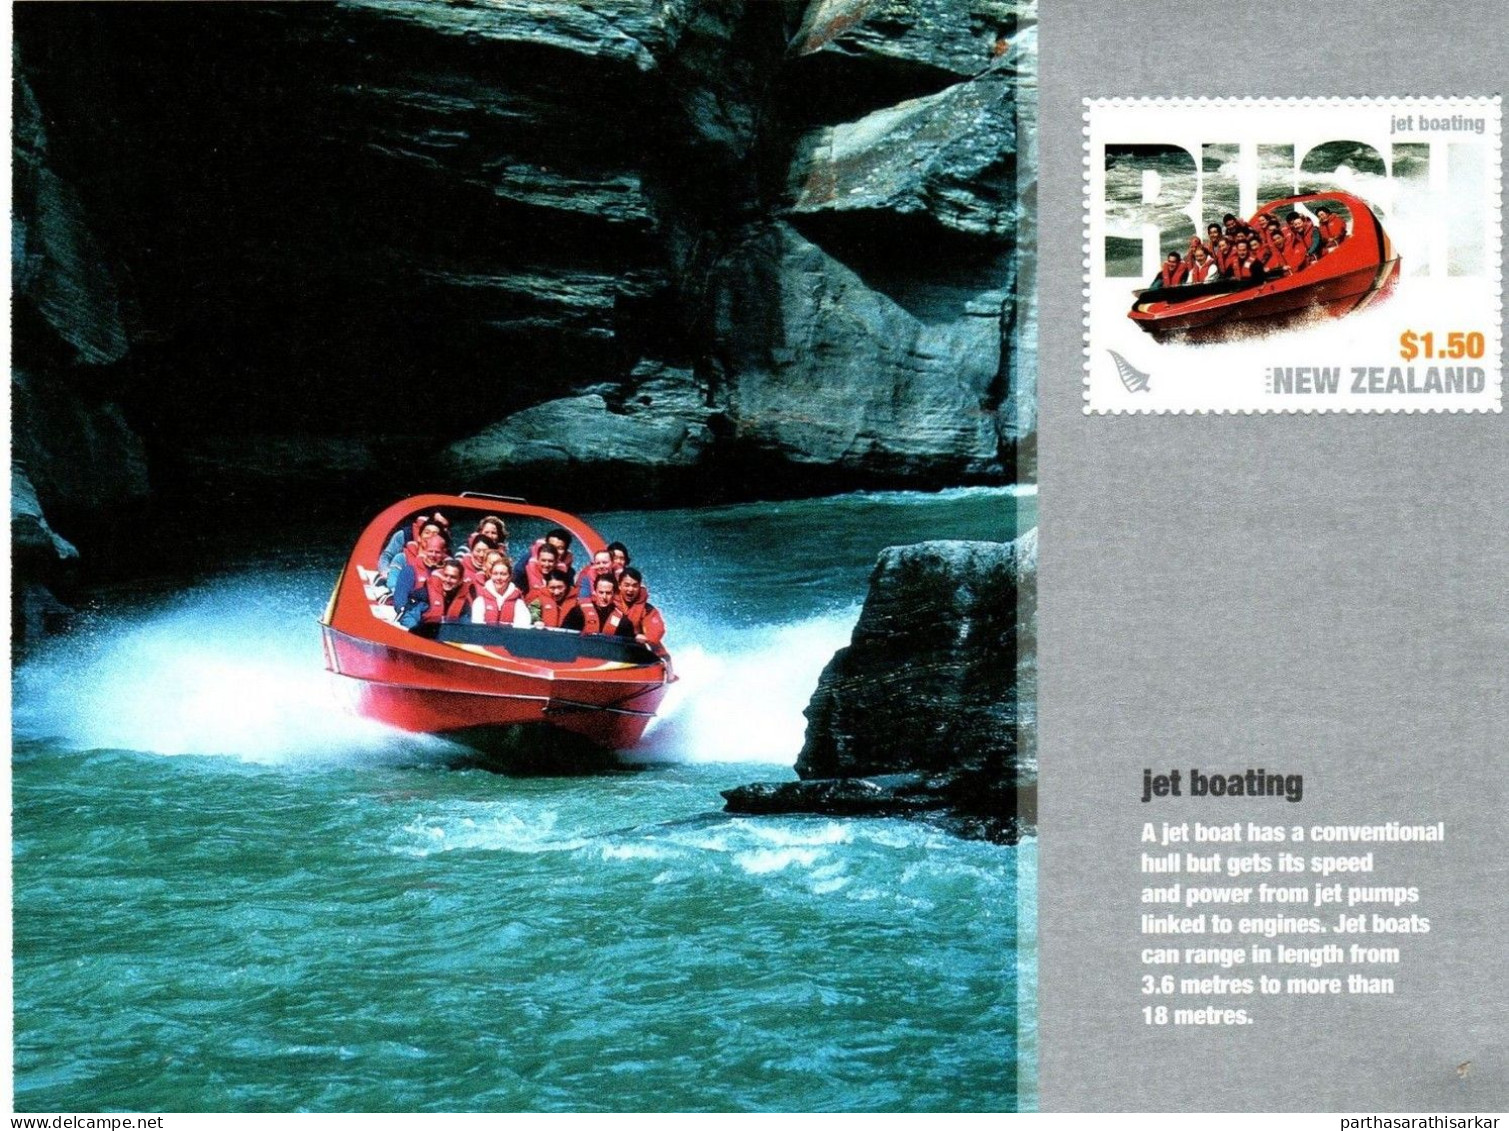 NEW ZEALAND 2004 EXTREME SPORTS BOOKLET MNH (HIGH FACE VALUE AROUND 14.4 NZD) - Carnets